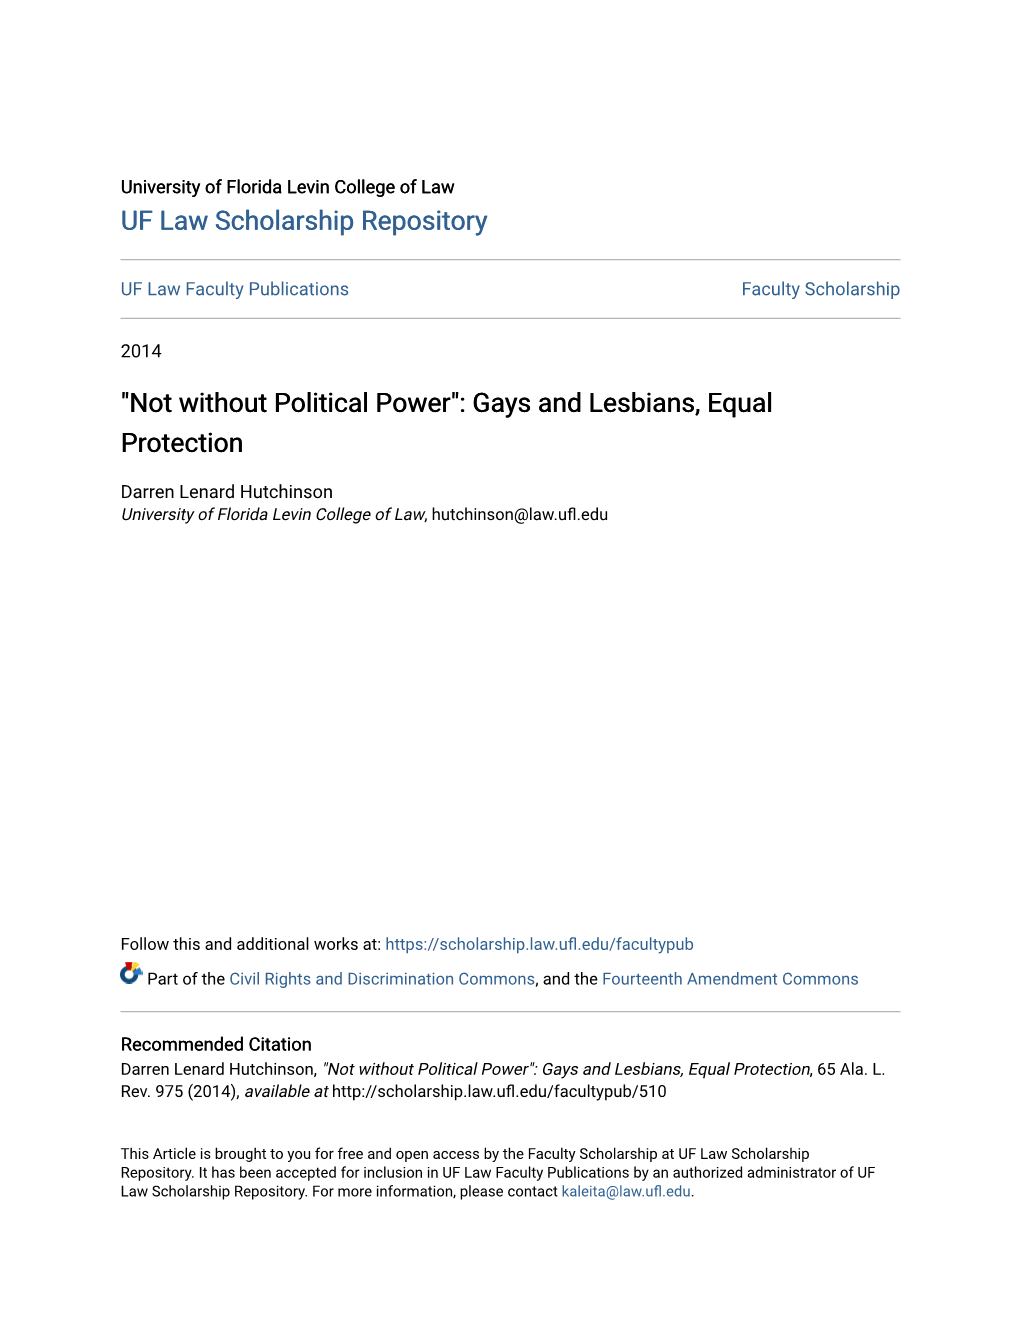 "Not Without Political Power": Gays and Lesbians, Equal Protection